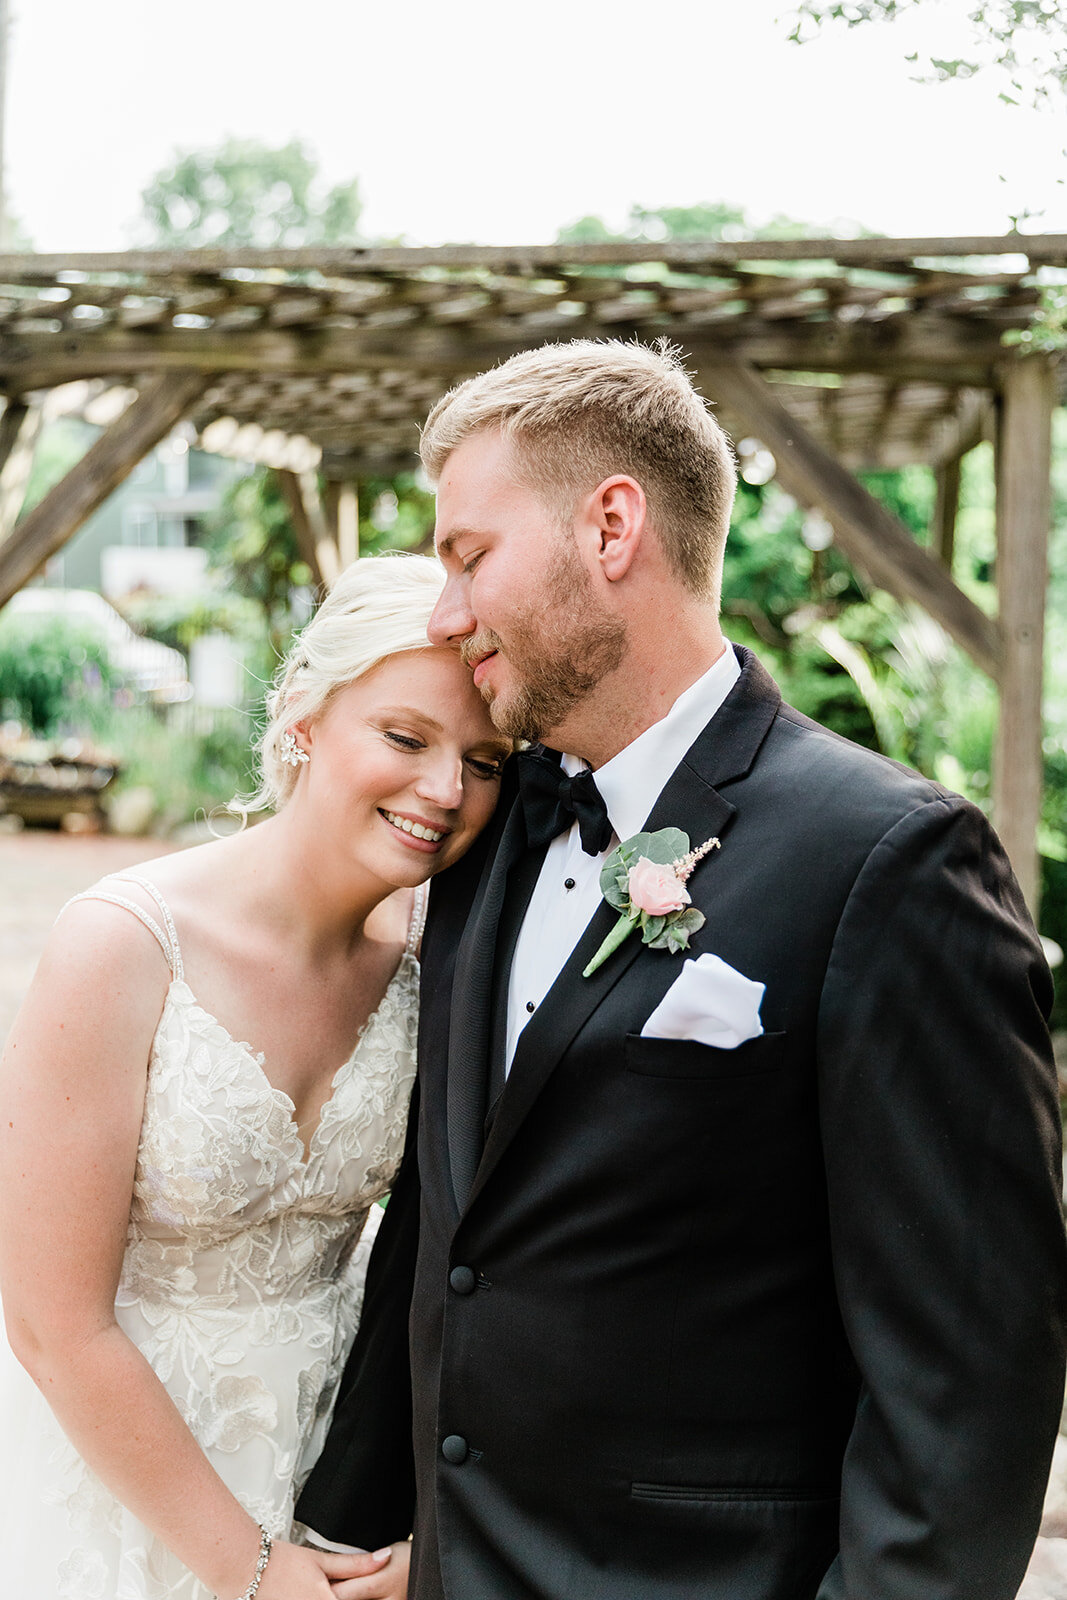 Romantic Industrial Summer Wedding Filled with Peonies in Sycamore Illinois captured by Expedition Joy